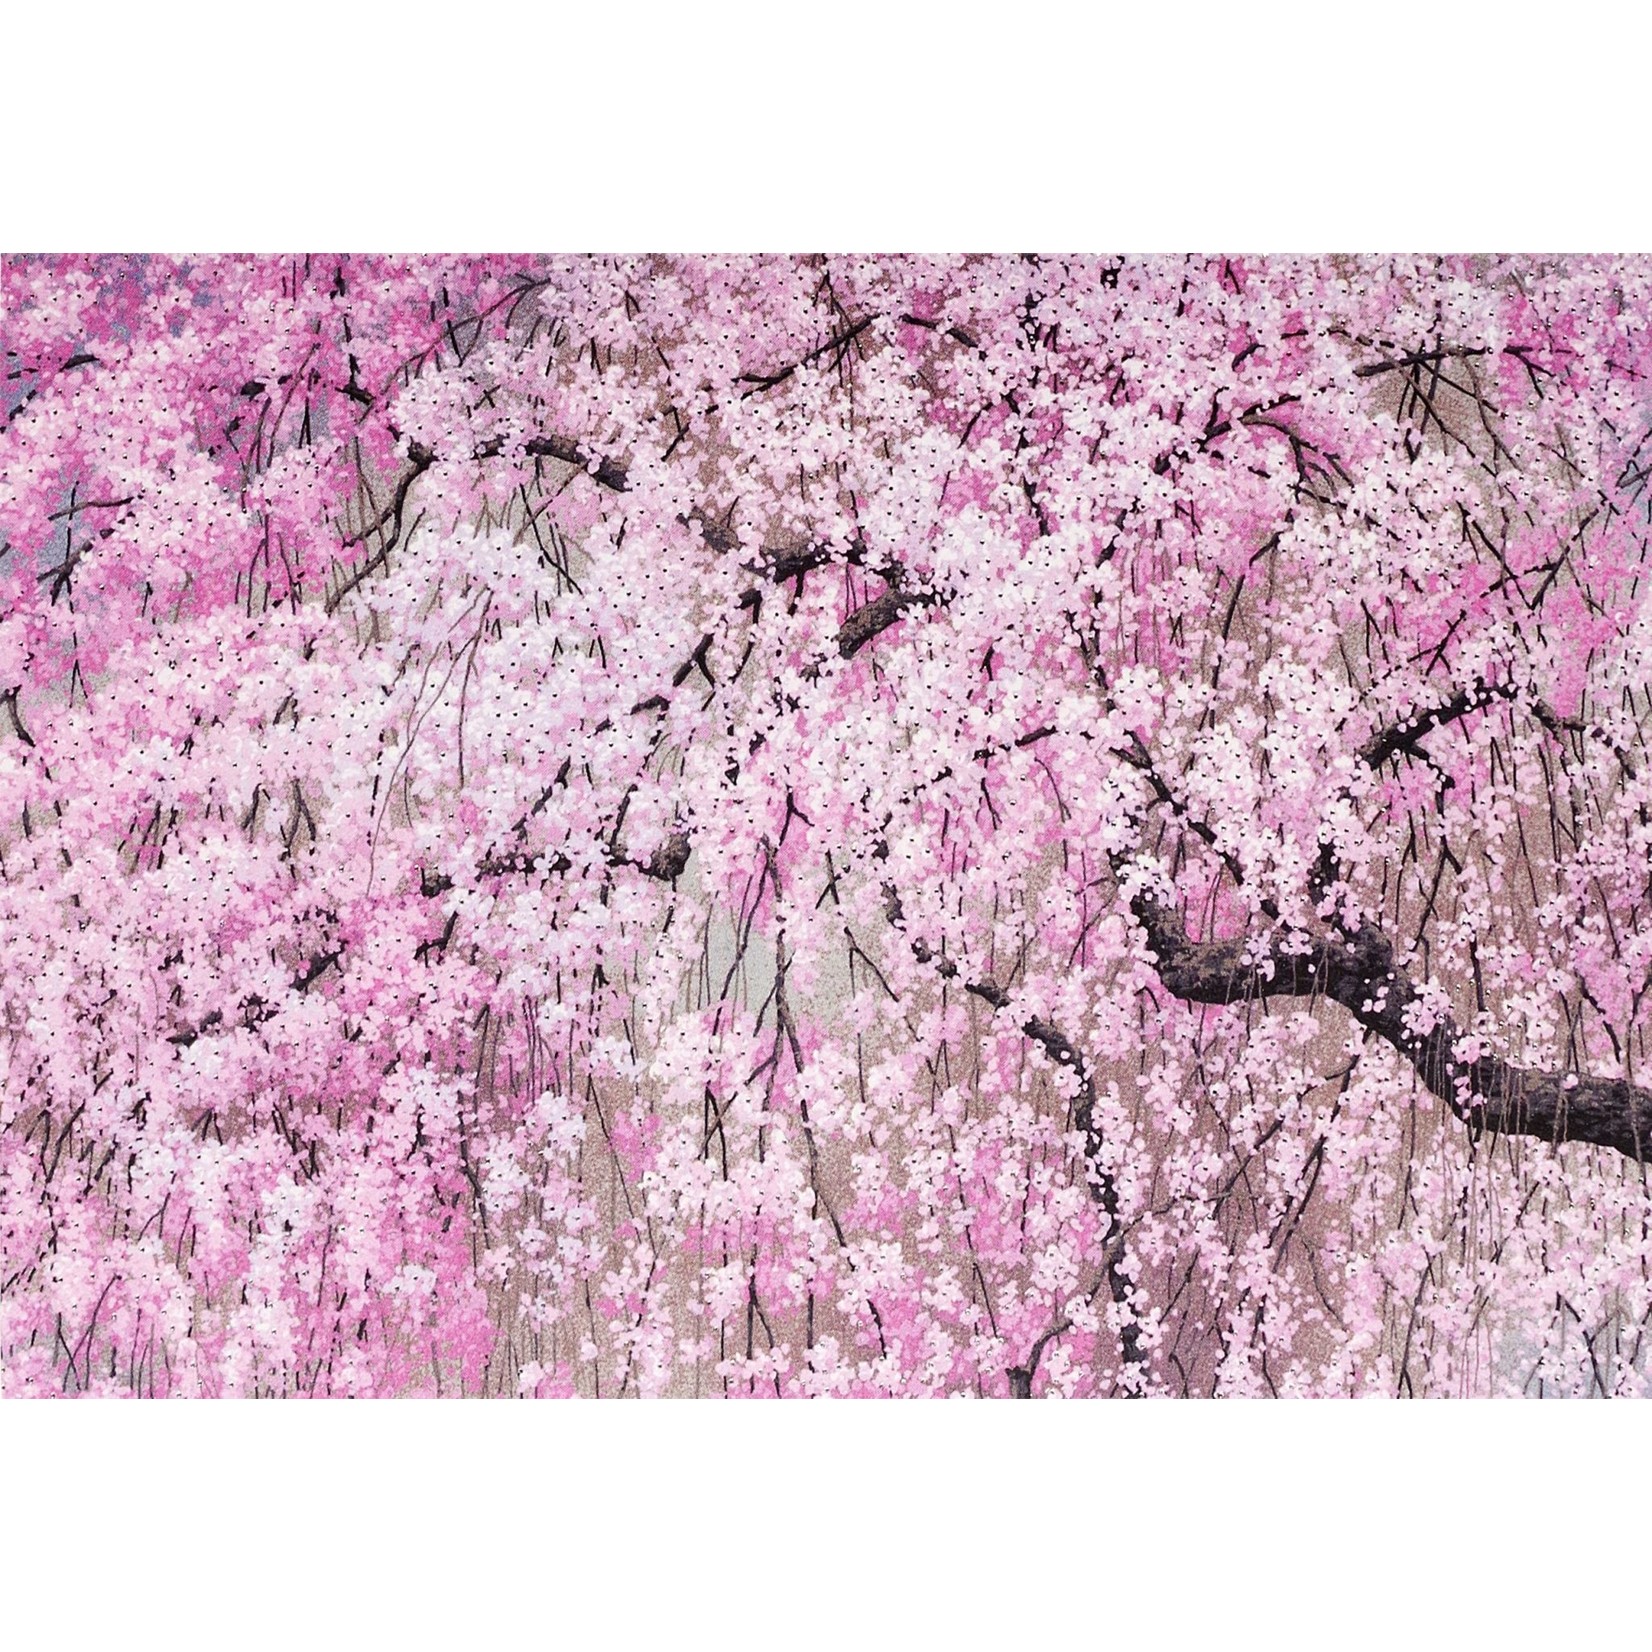 Boxed Note Cards: Cherry Blossoms